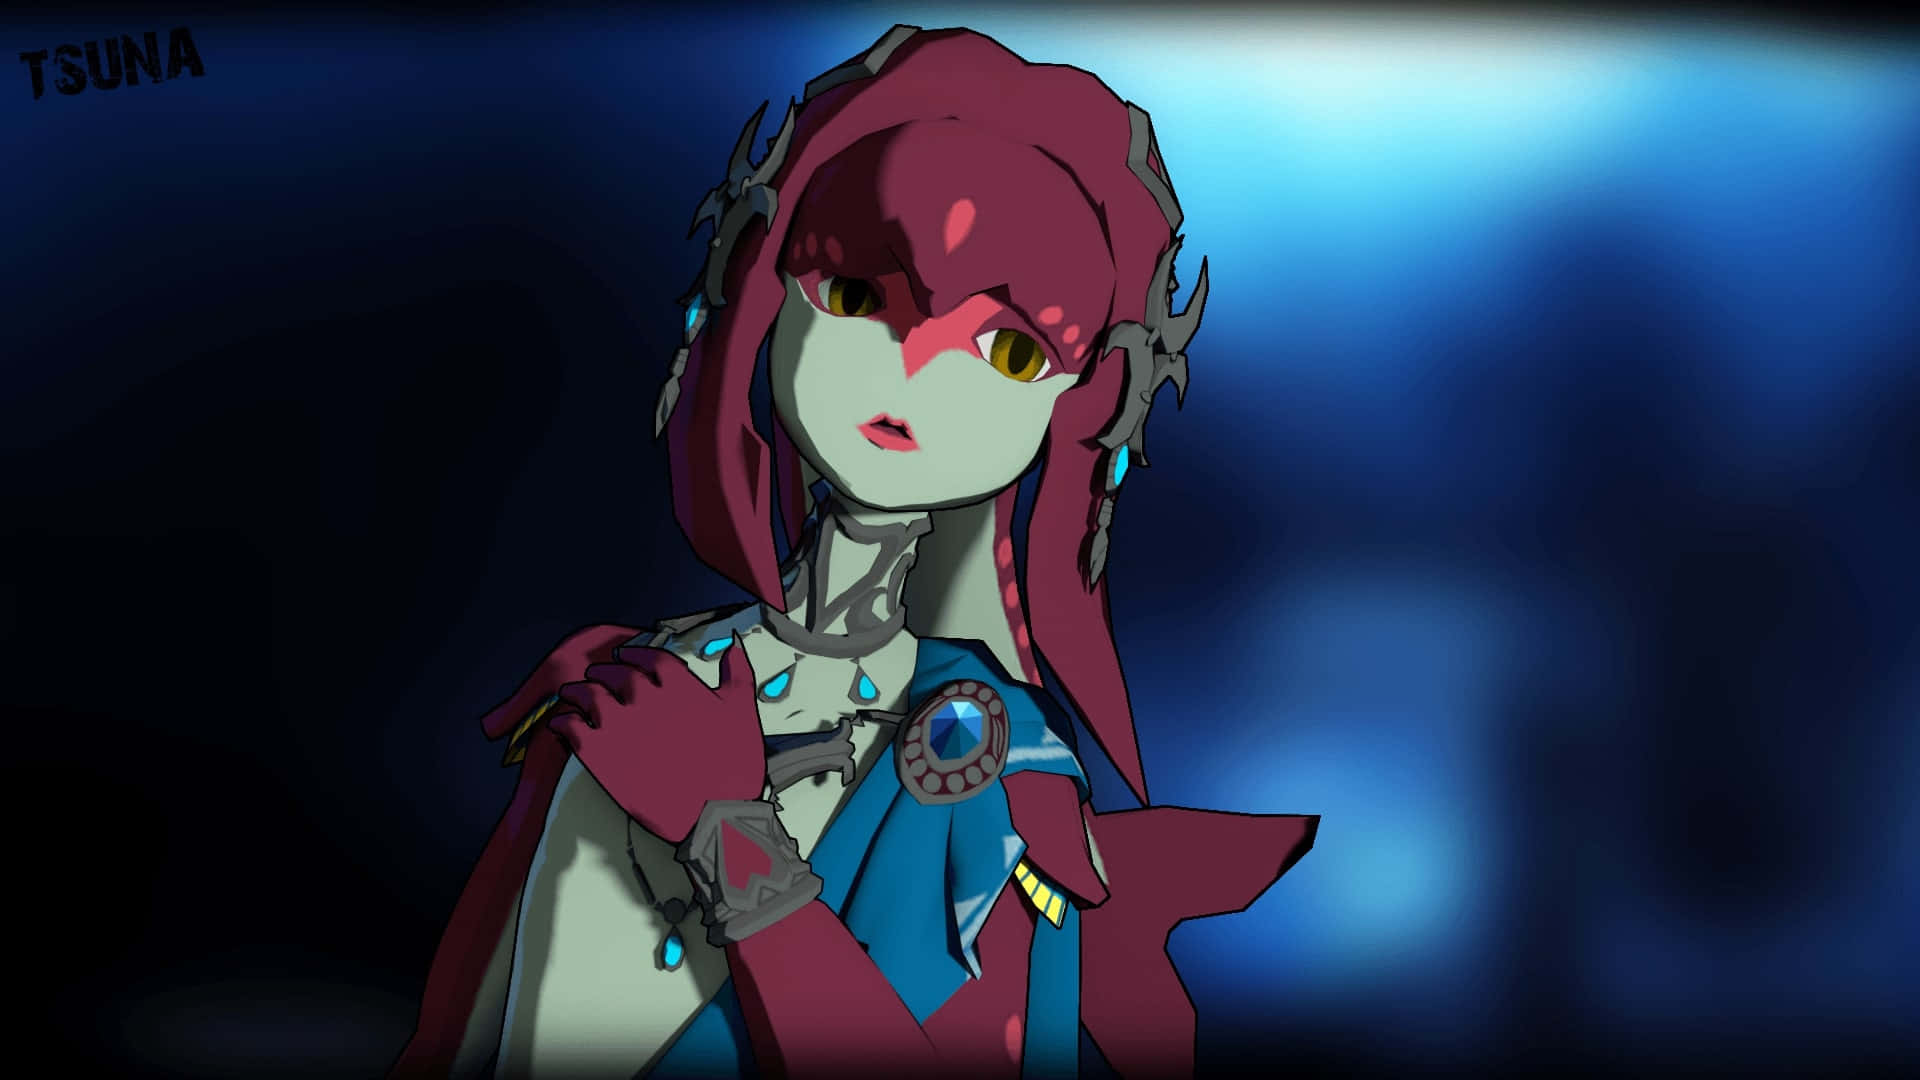 Mipha, the graceful Zora Champion from The Legend of Zelda: Breath of the Wild Wallpaper